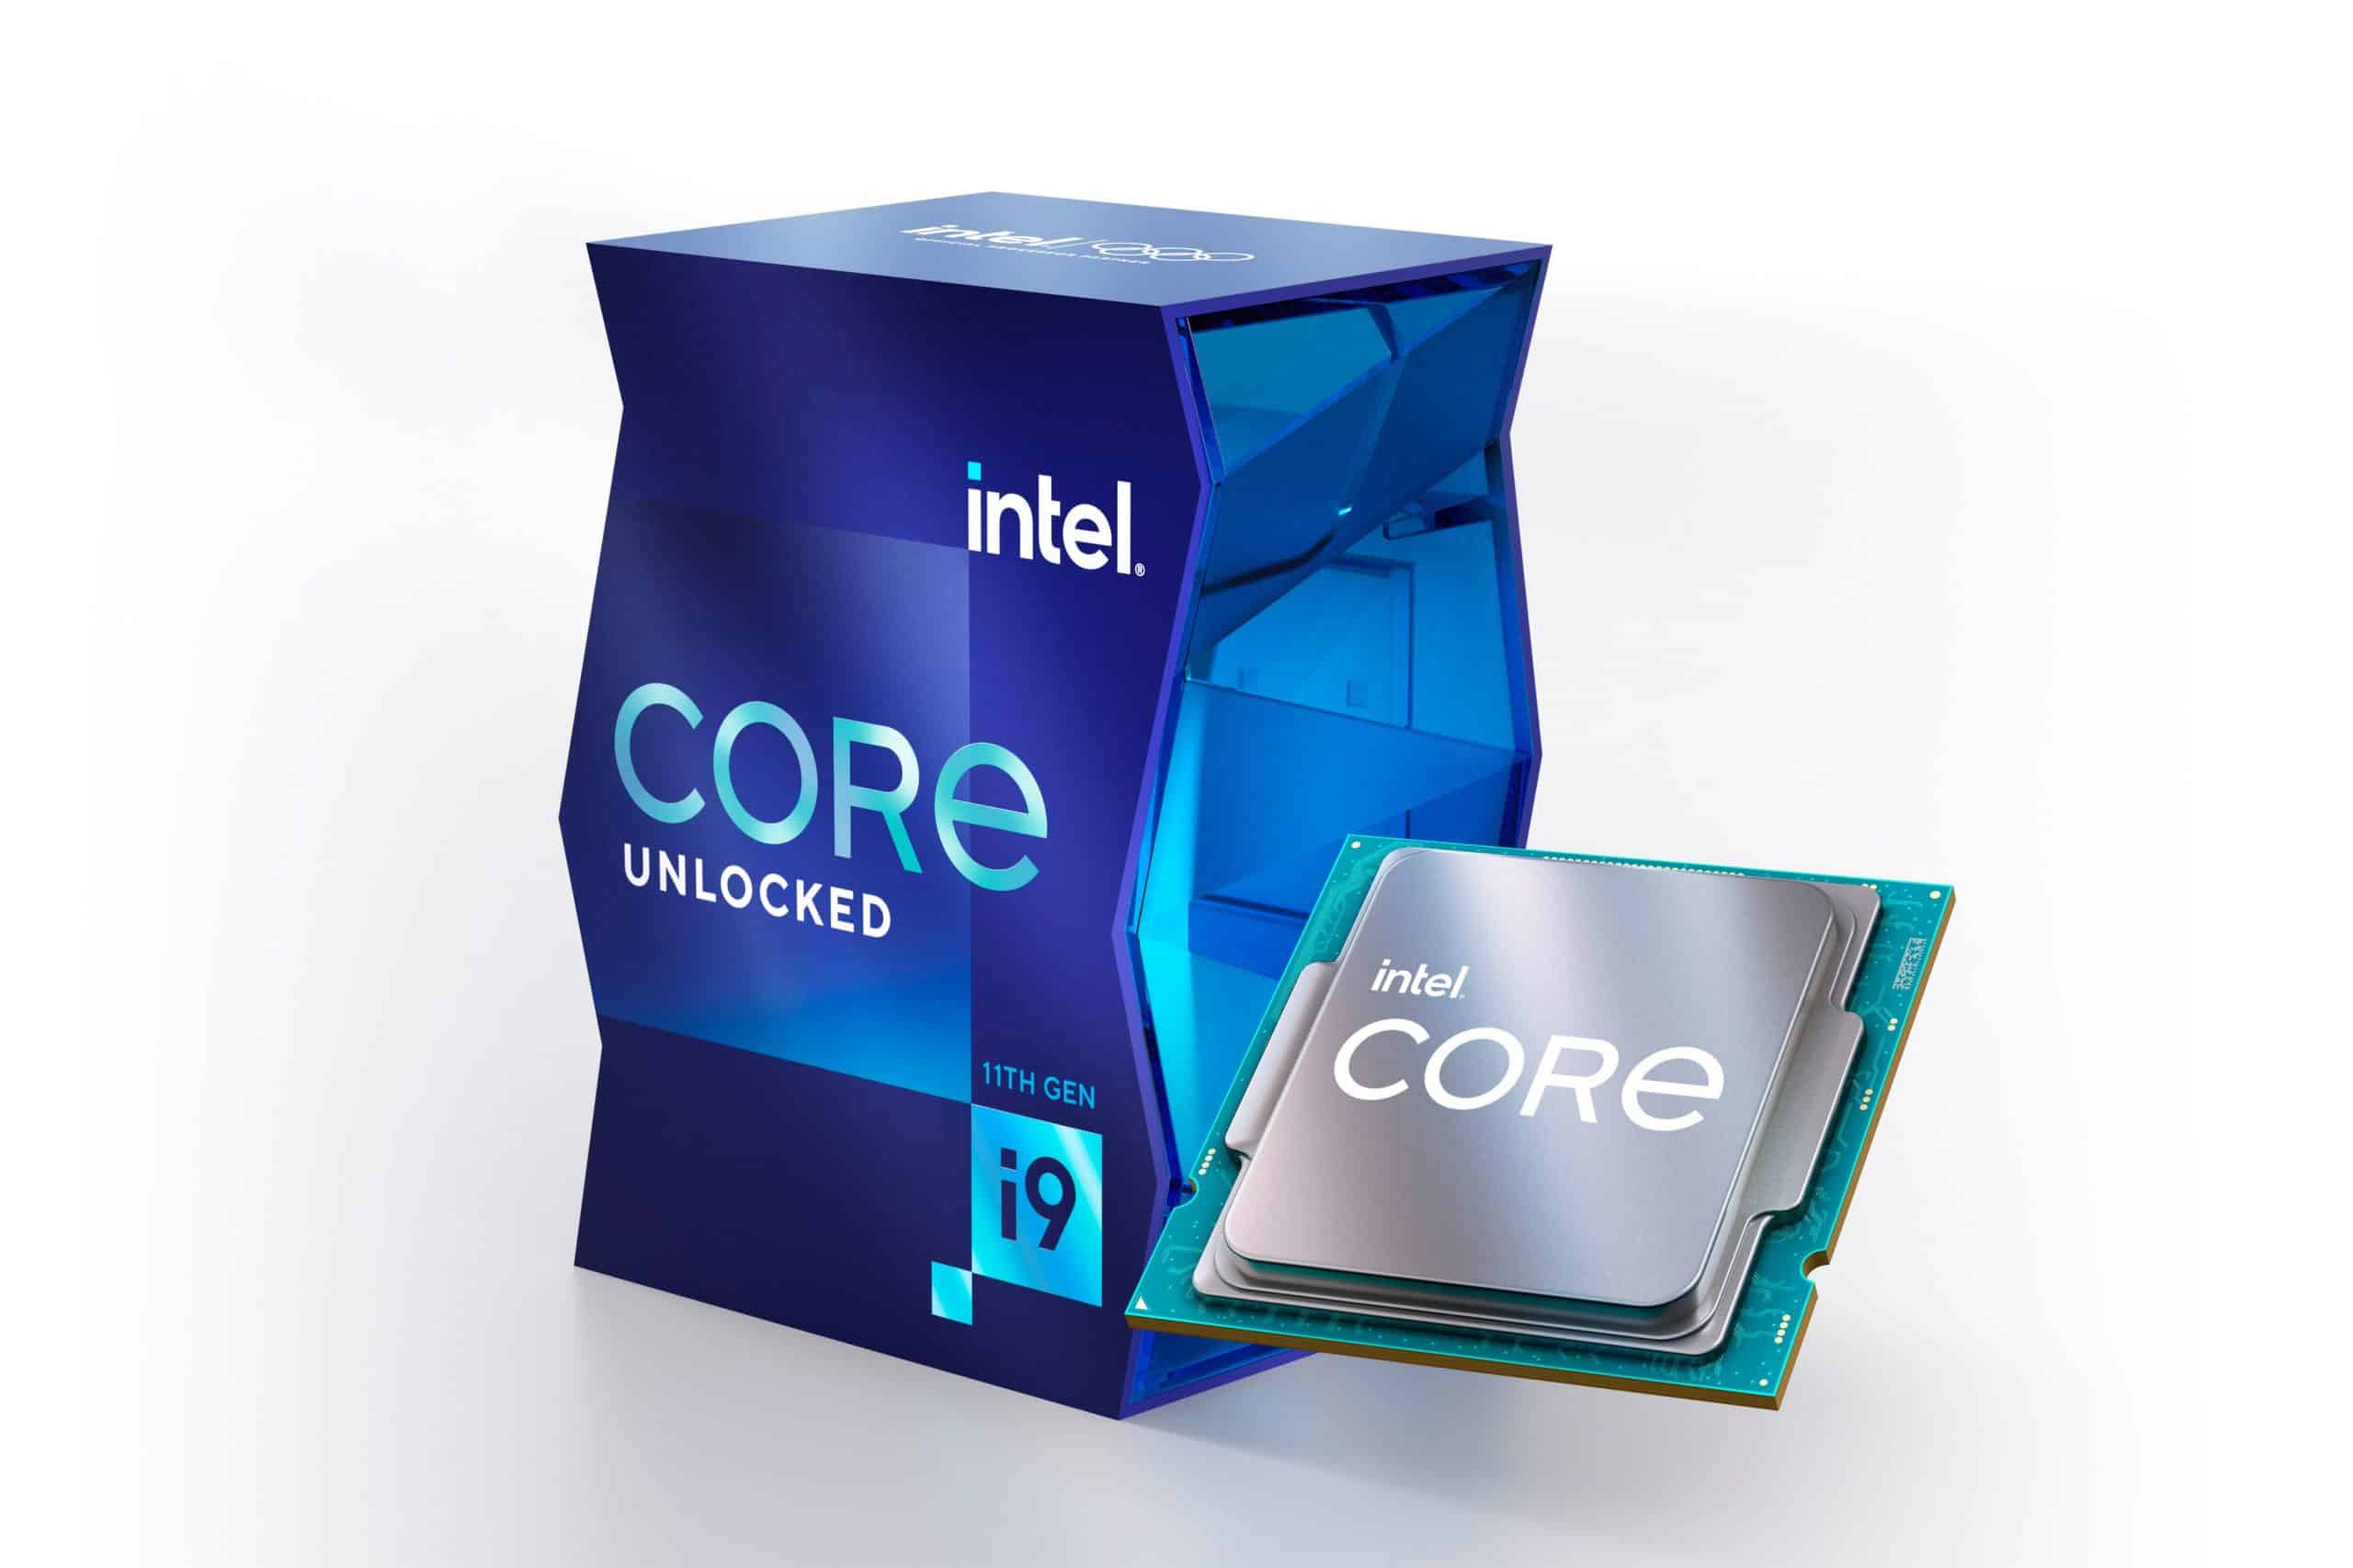 Intel announces the worldwide launch of the 11th Generation of Intel Core processors